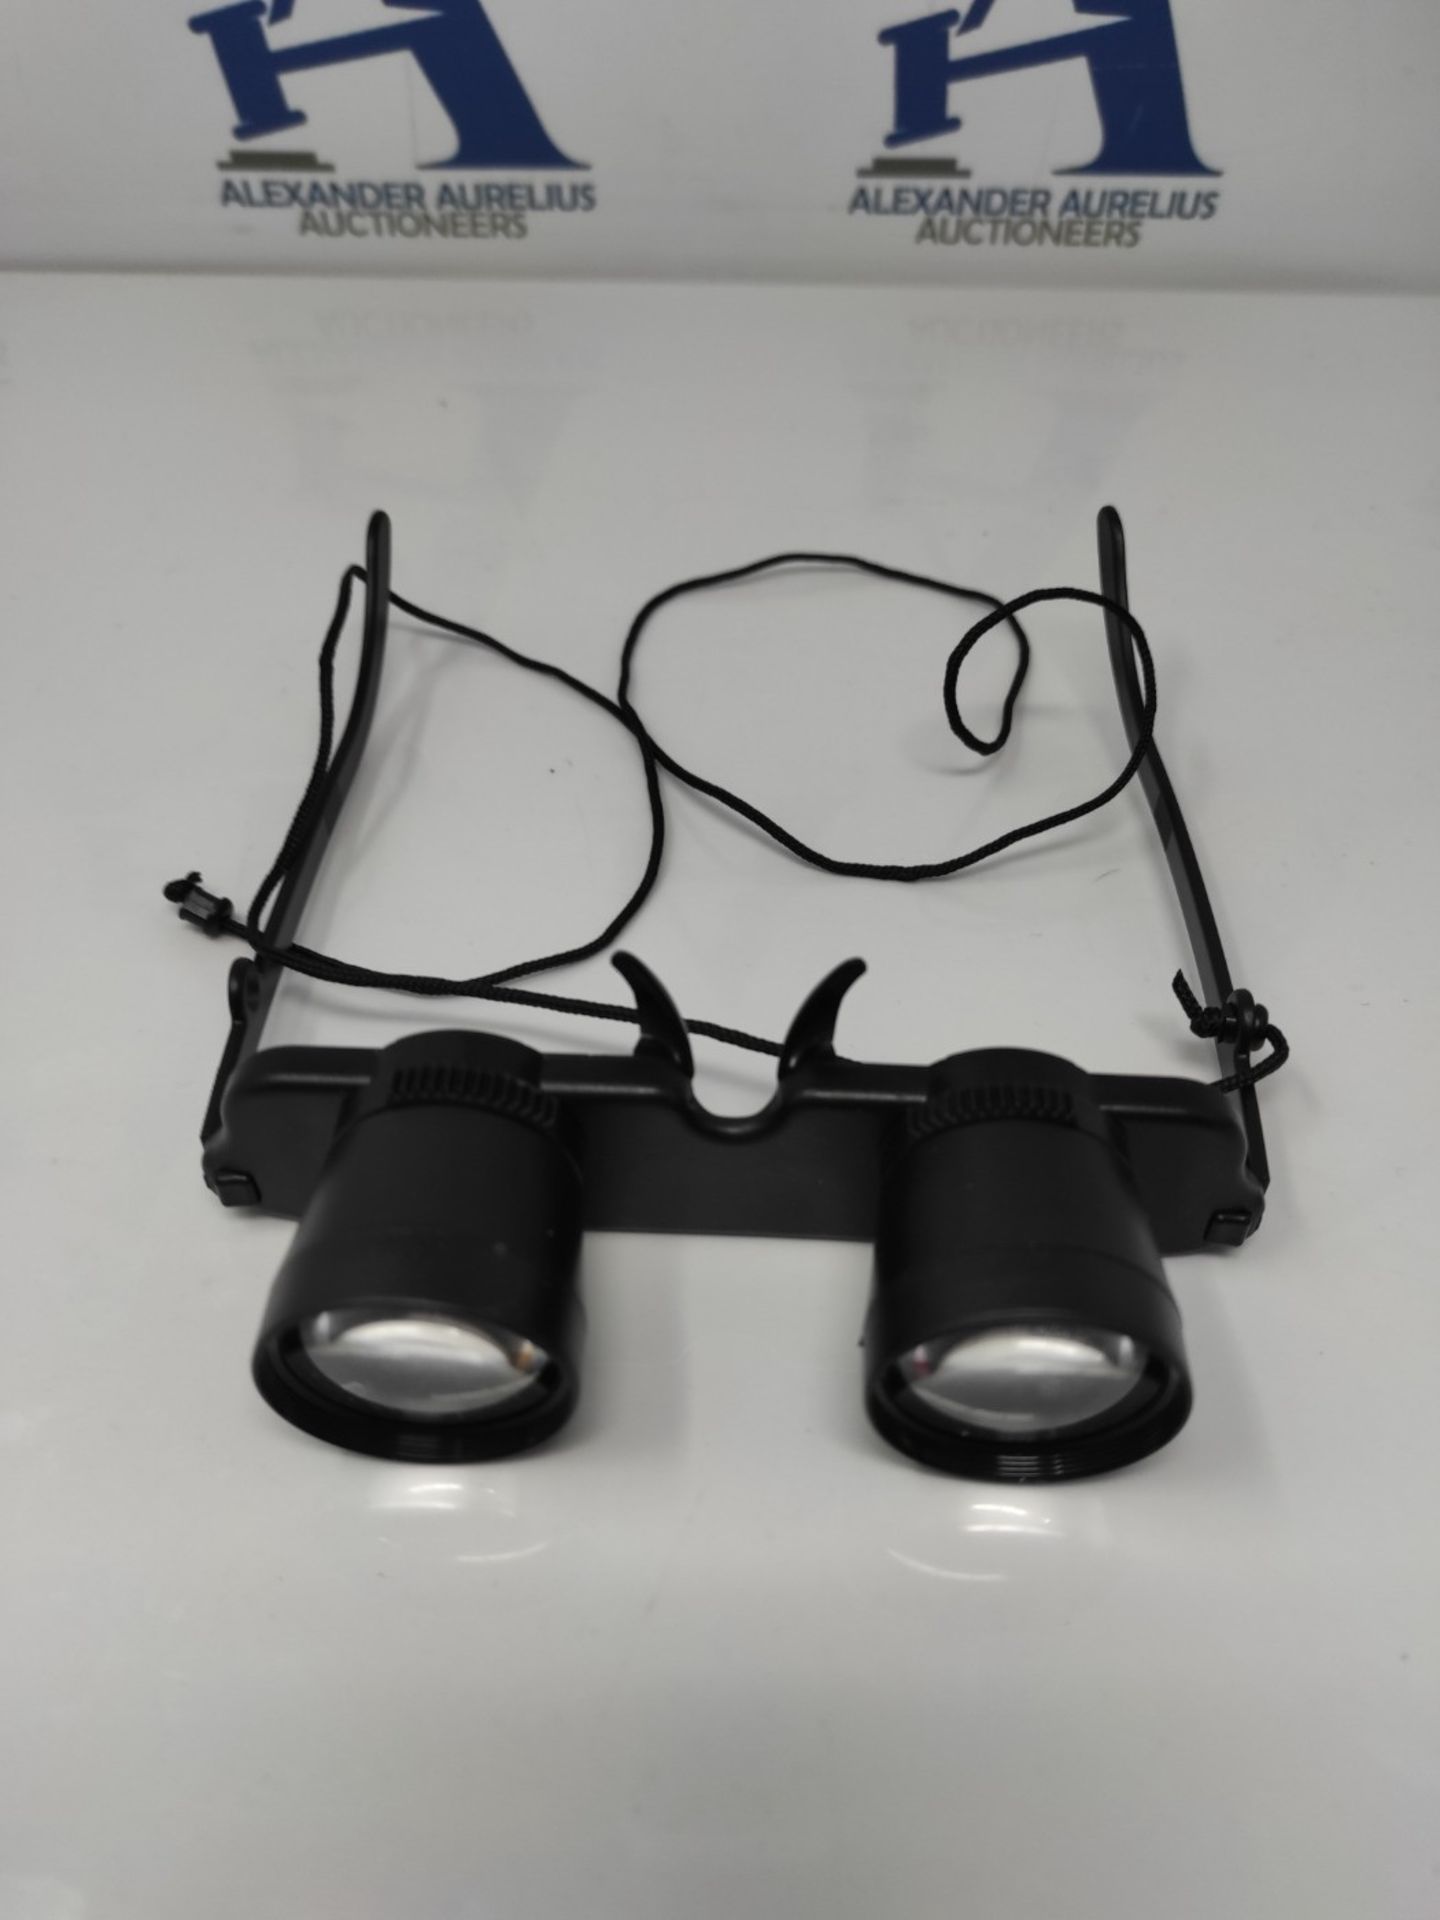 BESPORTBLE Professional Binoculars Glasses for Fishing, Bird Watching, Sports, Concert - Image 2 of 2